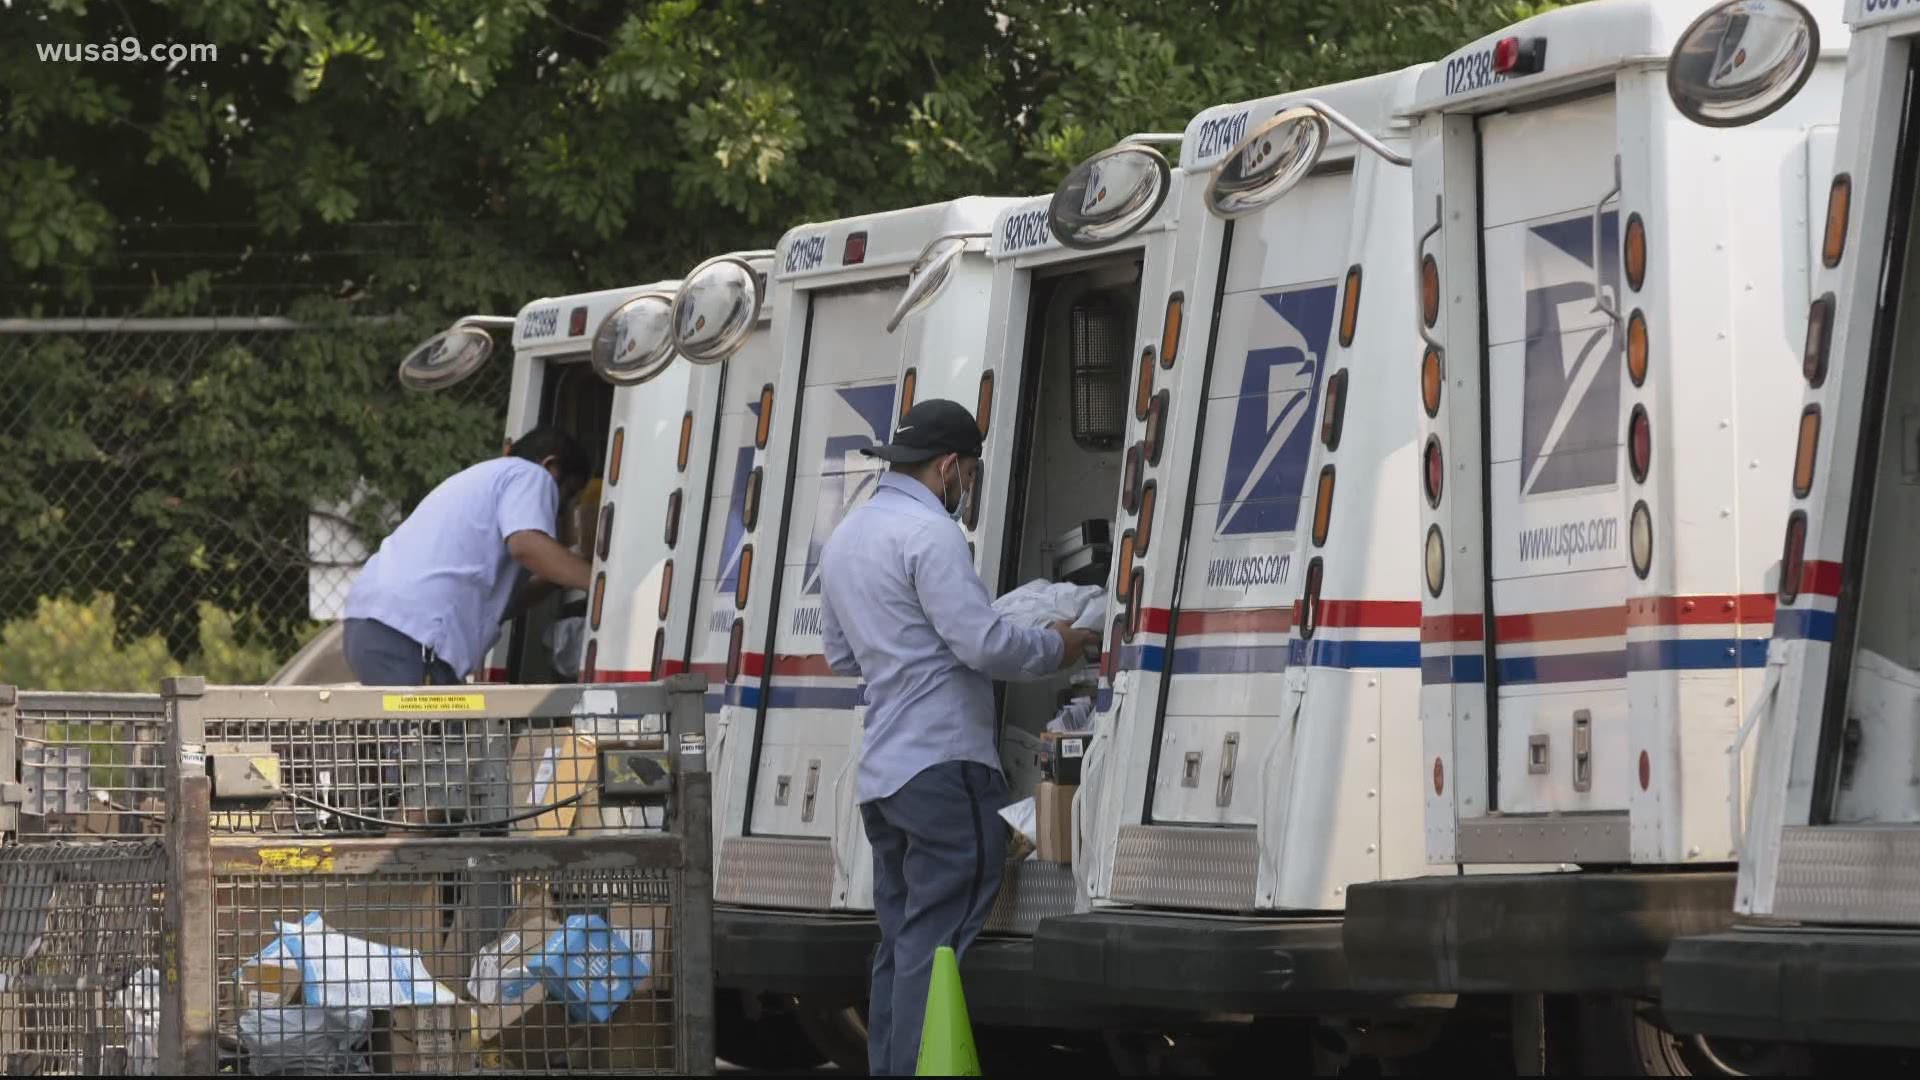 Several members of Congress are in favor of the USPS Fairness Act, which would get rid of a law that prefunds pensions for postal workers